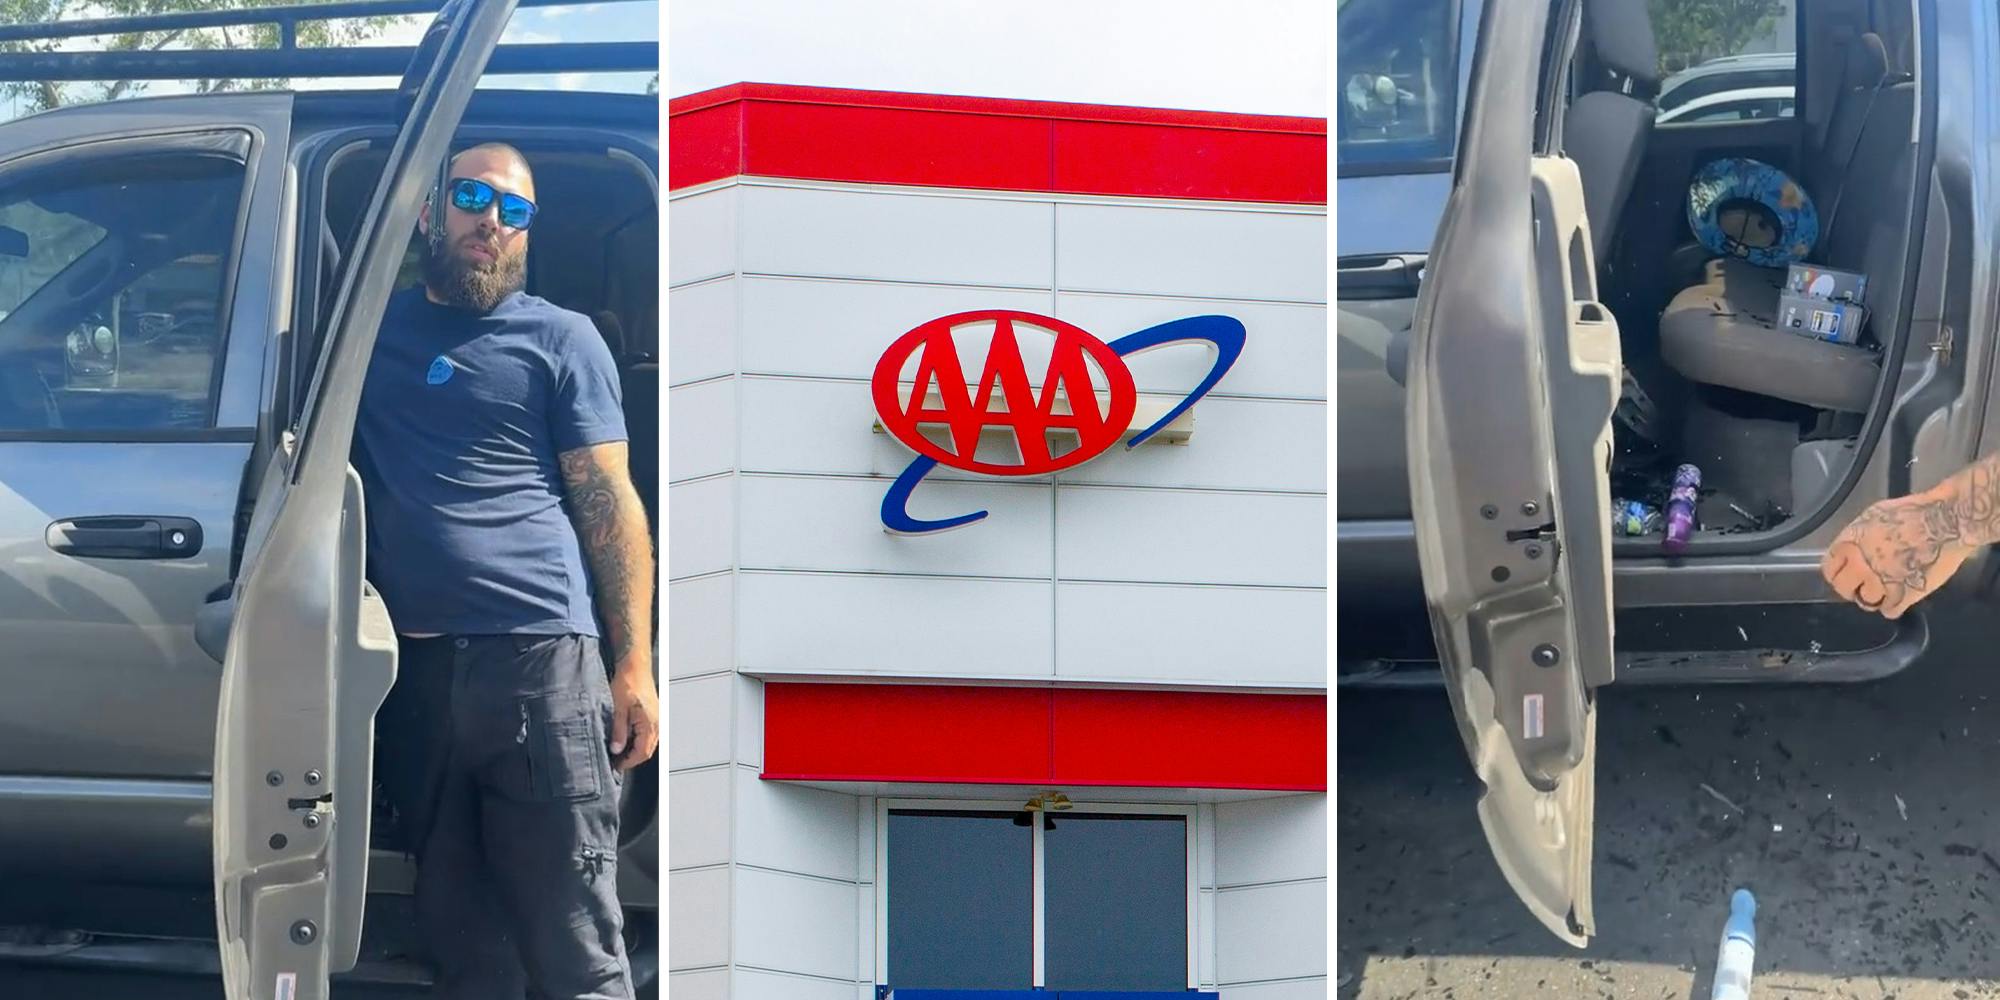 ‘The things you have to do’: Man gets sick of waiting for AAA to unlock car door, does something shocking instead